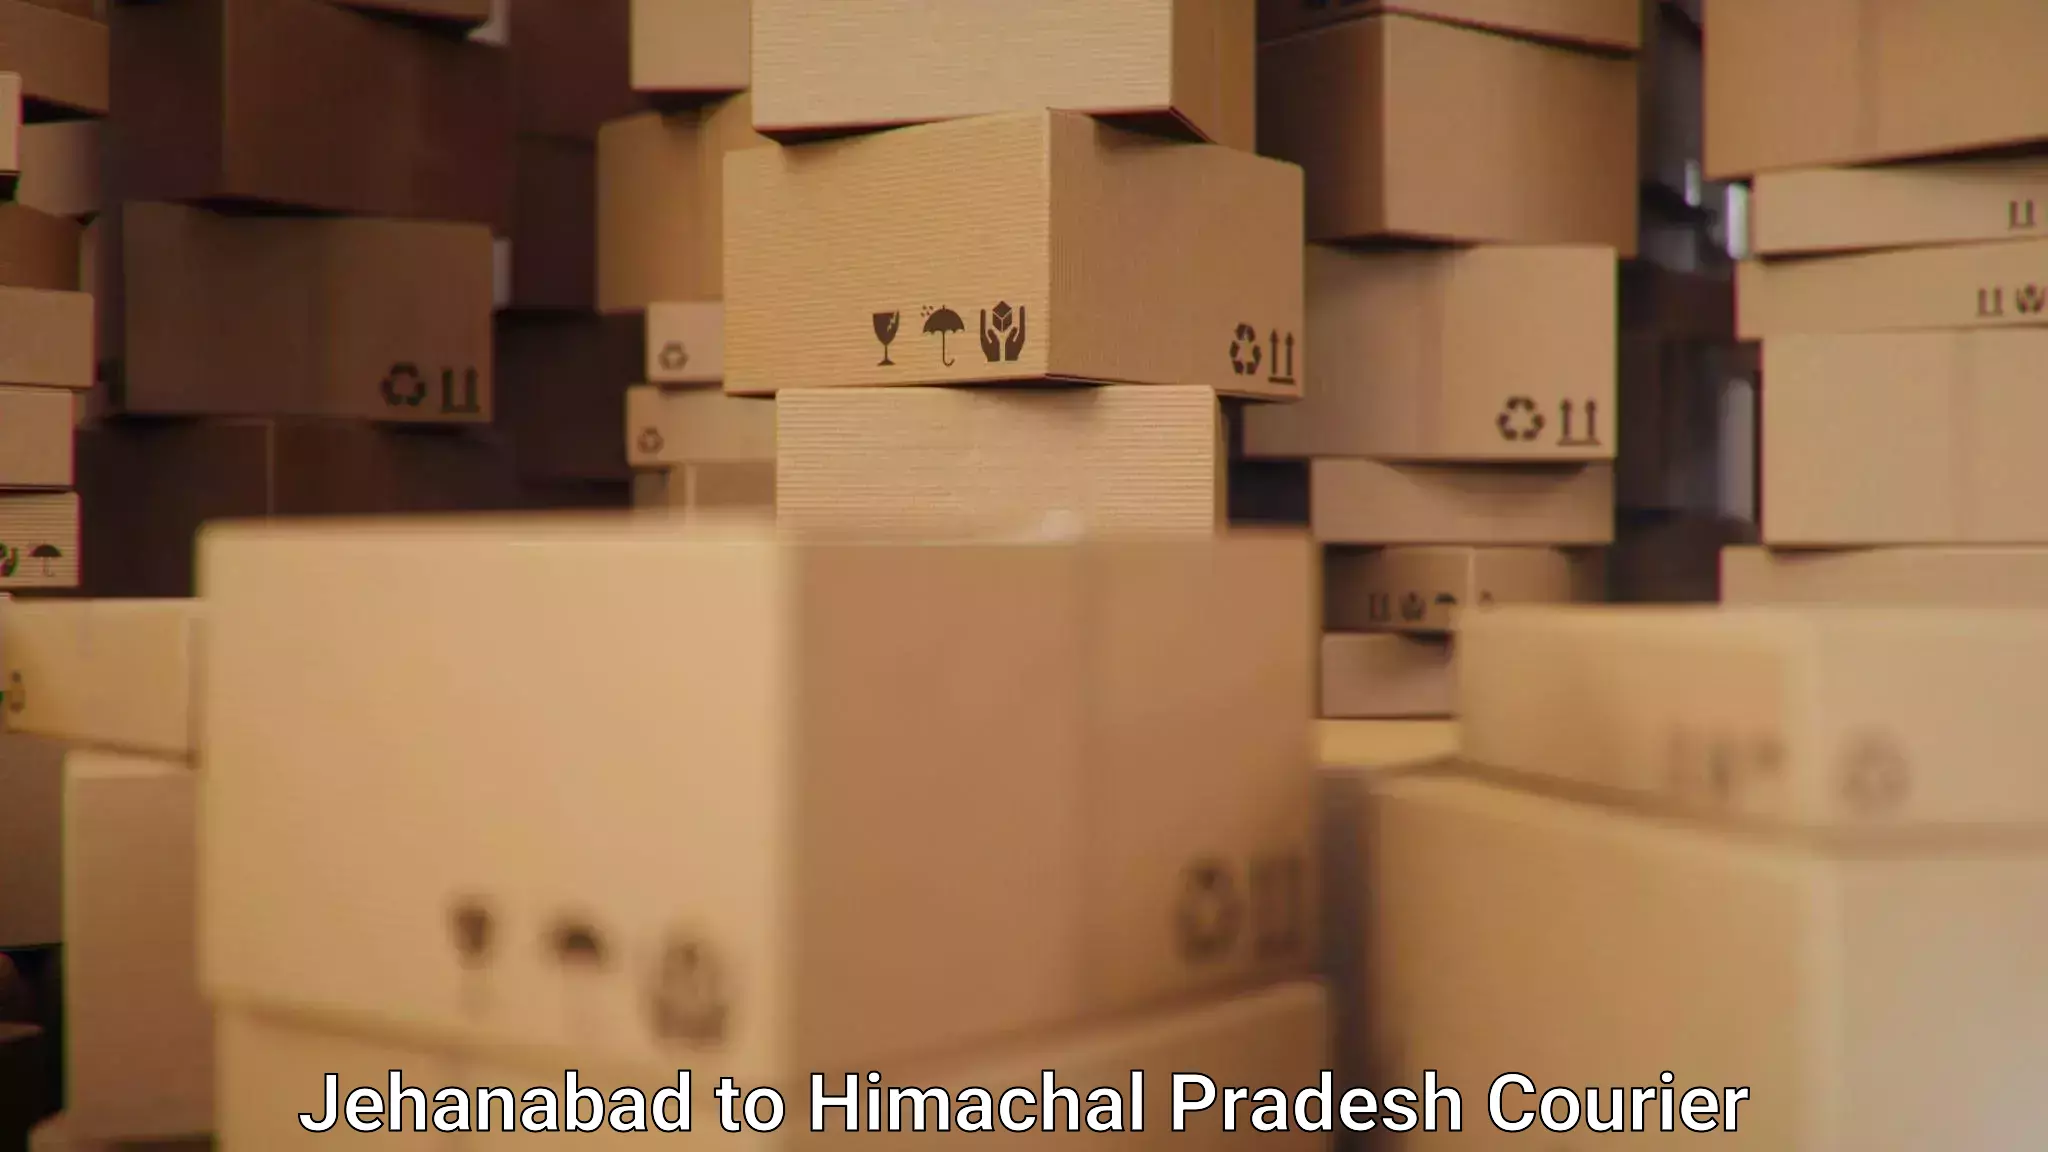 Efficient package consolidation Jehanabad to Dharamshala